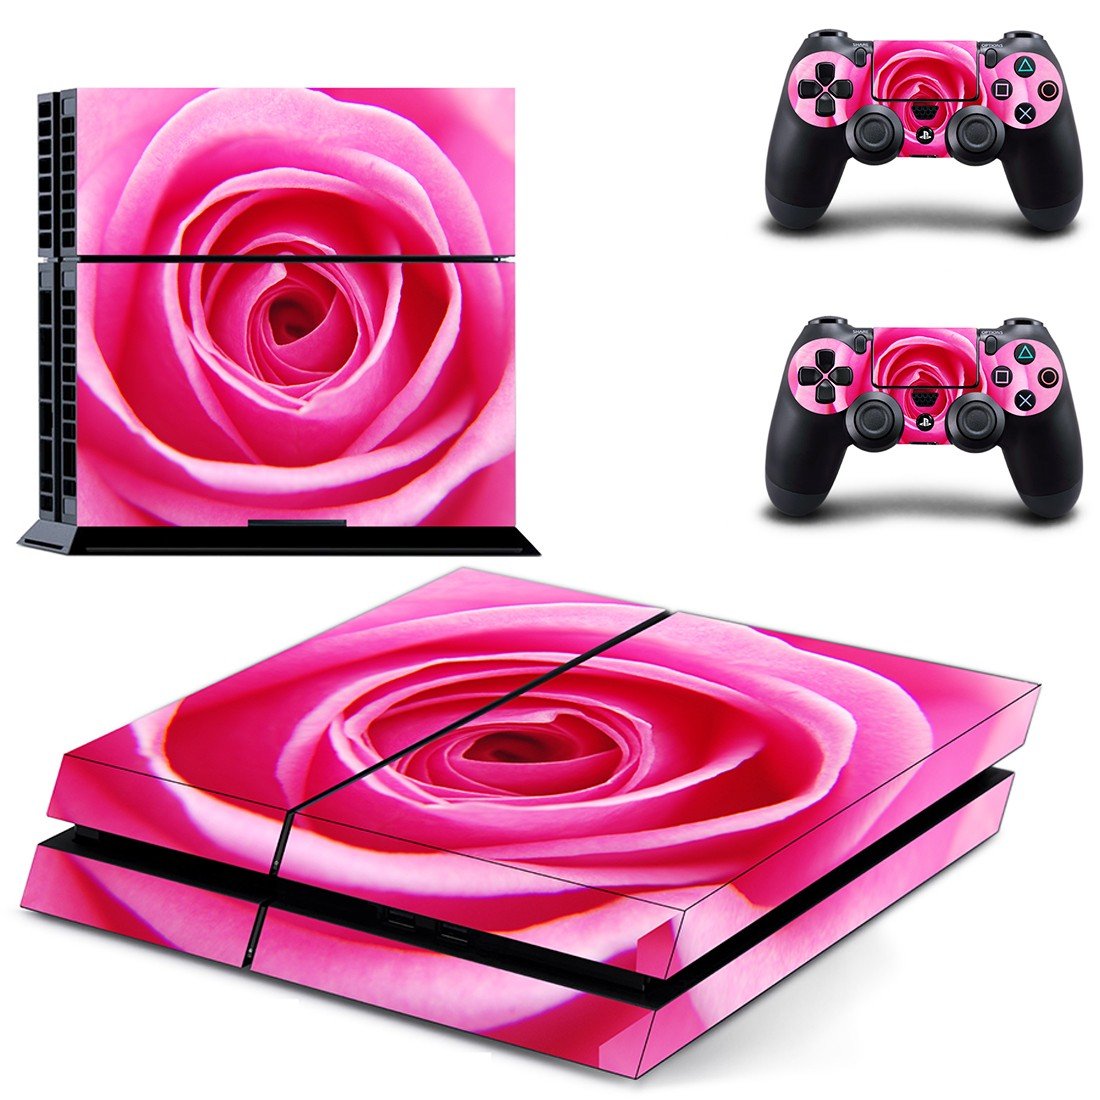 PlayStation 4 Skin Cover - Nice Rose